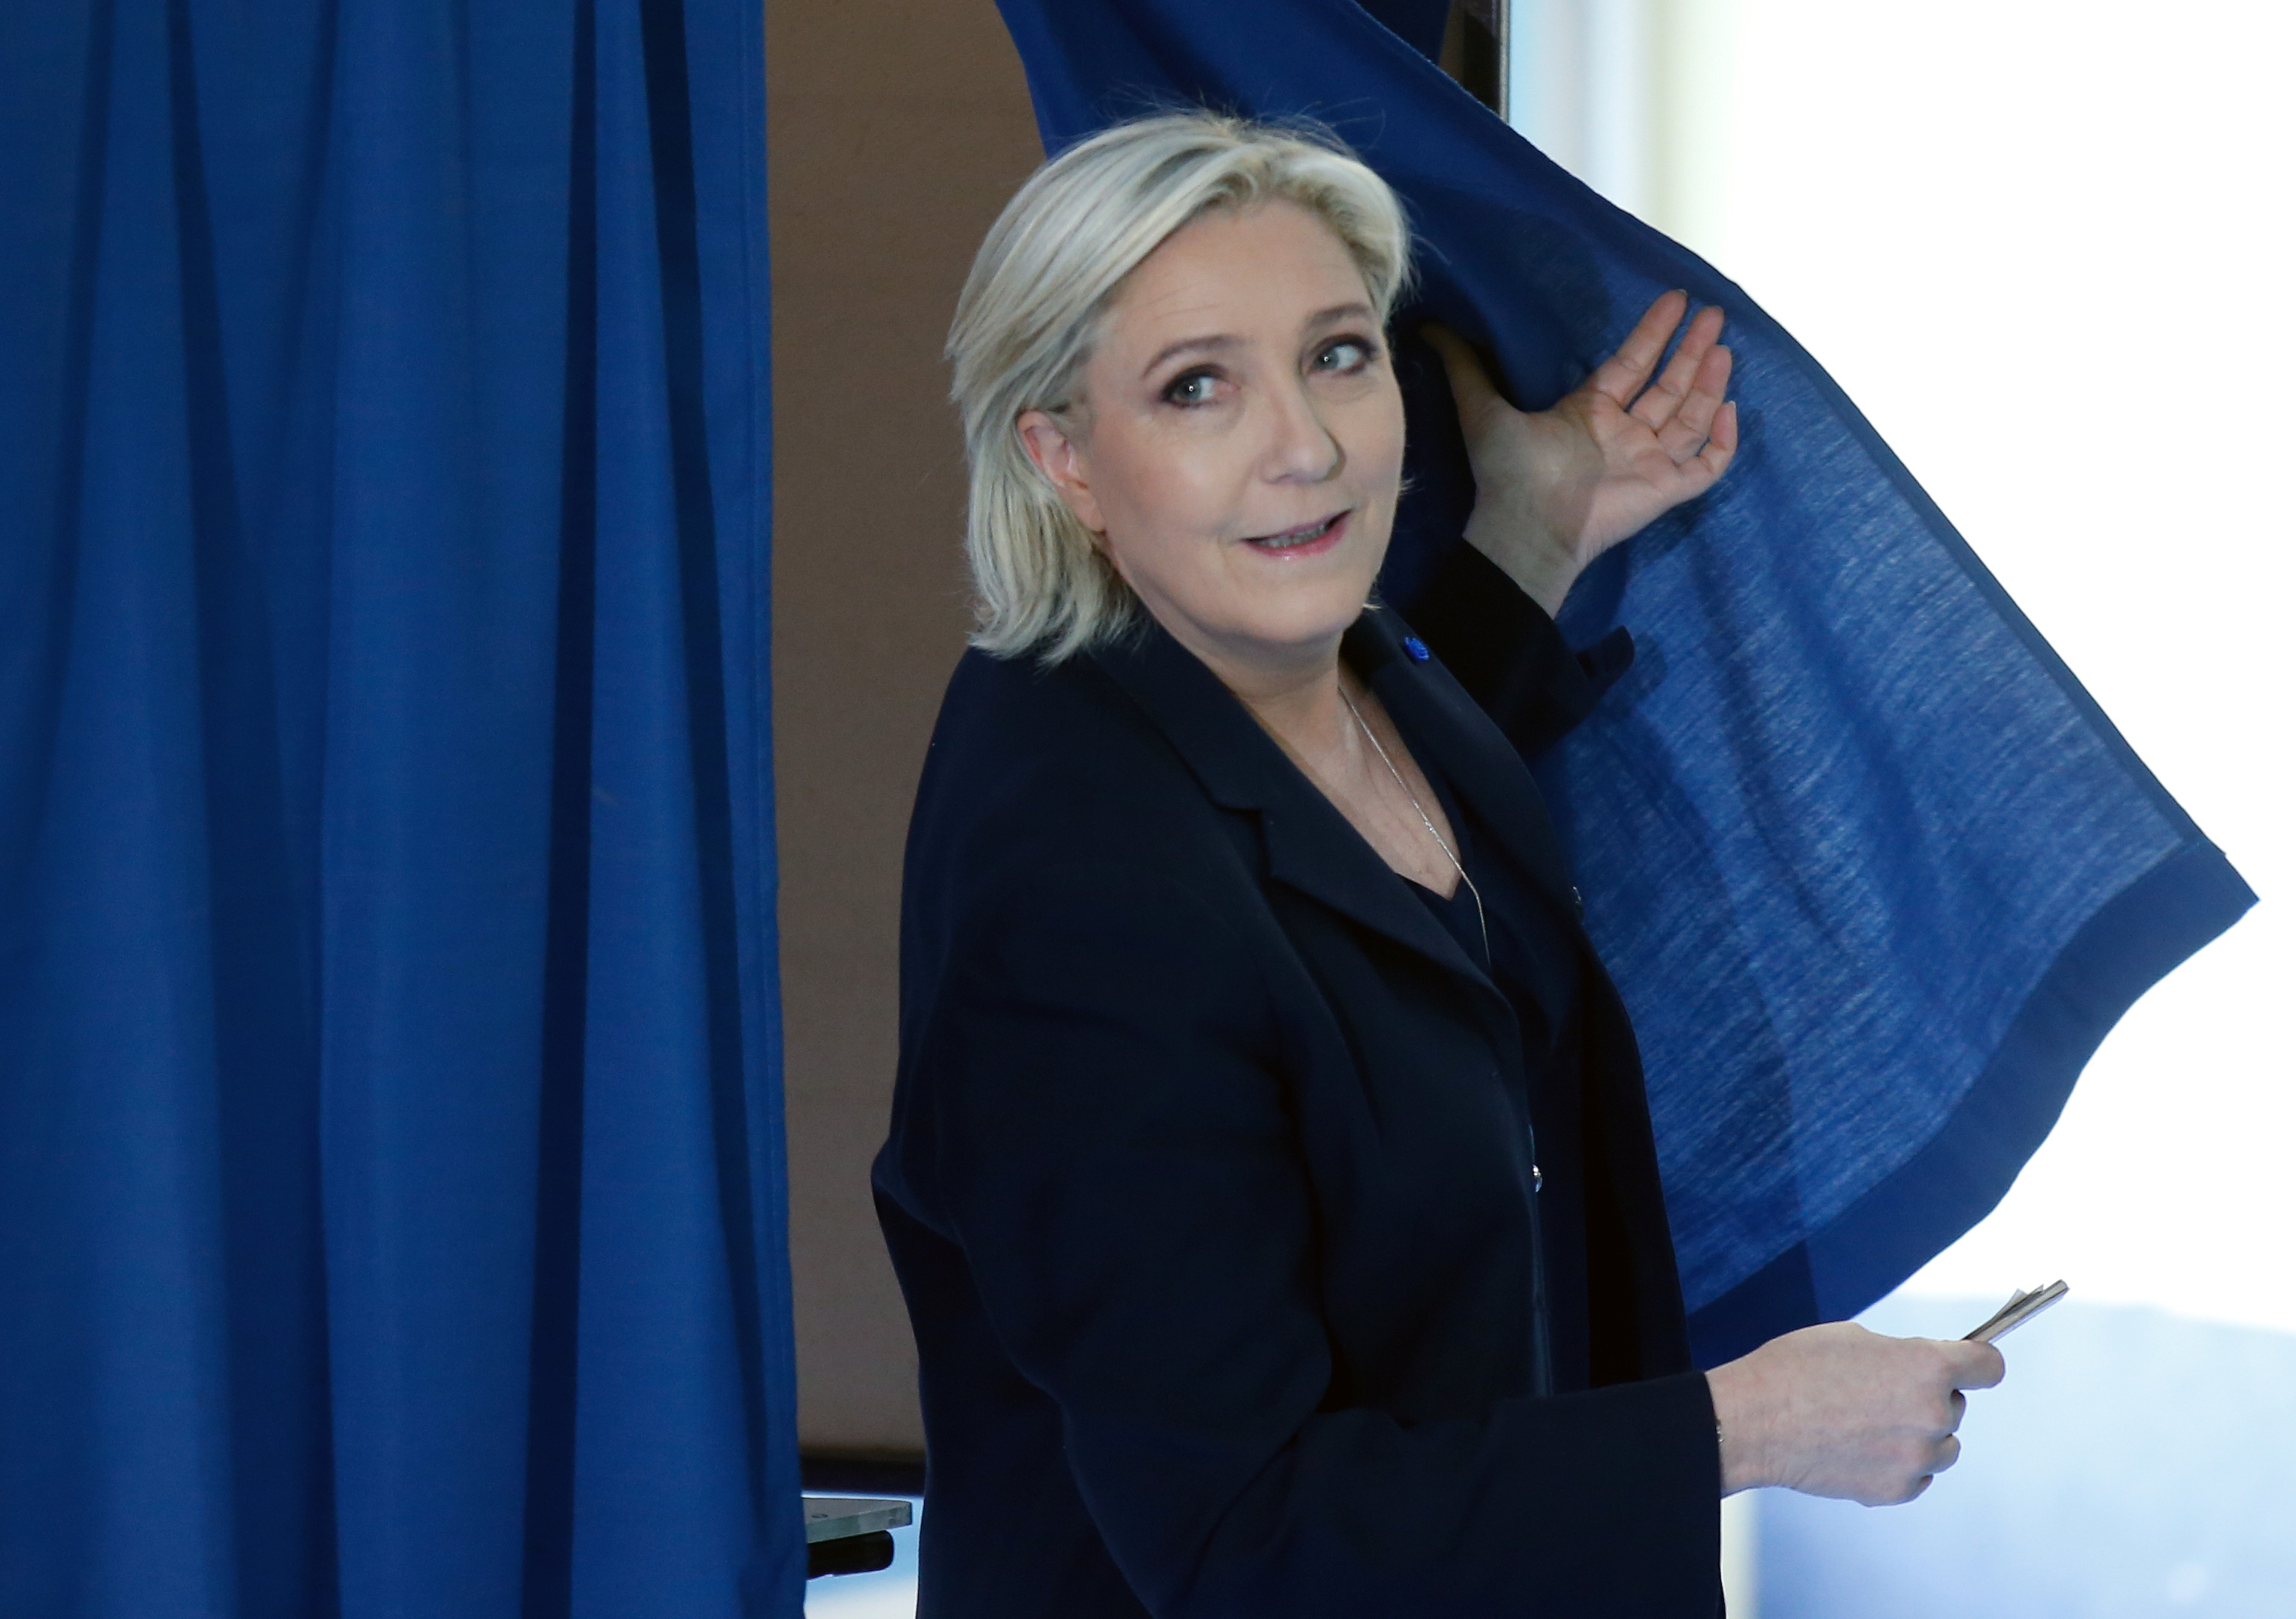 Marine Le Pen, French National Front (FN) political party leader and candidate for French 2017 presidential election, leaves a polling booth as she votes in the first round of 2017 French presidential election at a polling station in Henin-Beaumont, northern France, April 23, 2017. REUTERS/Pascal Rossignol - RTS13I5Z